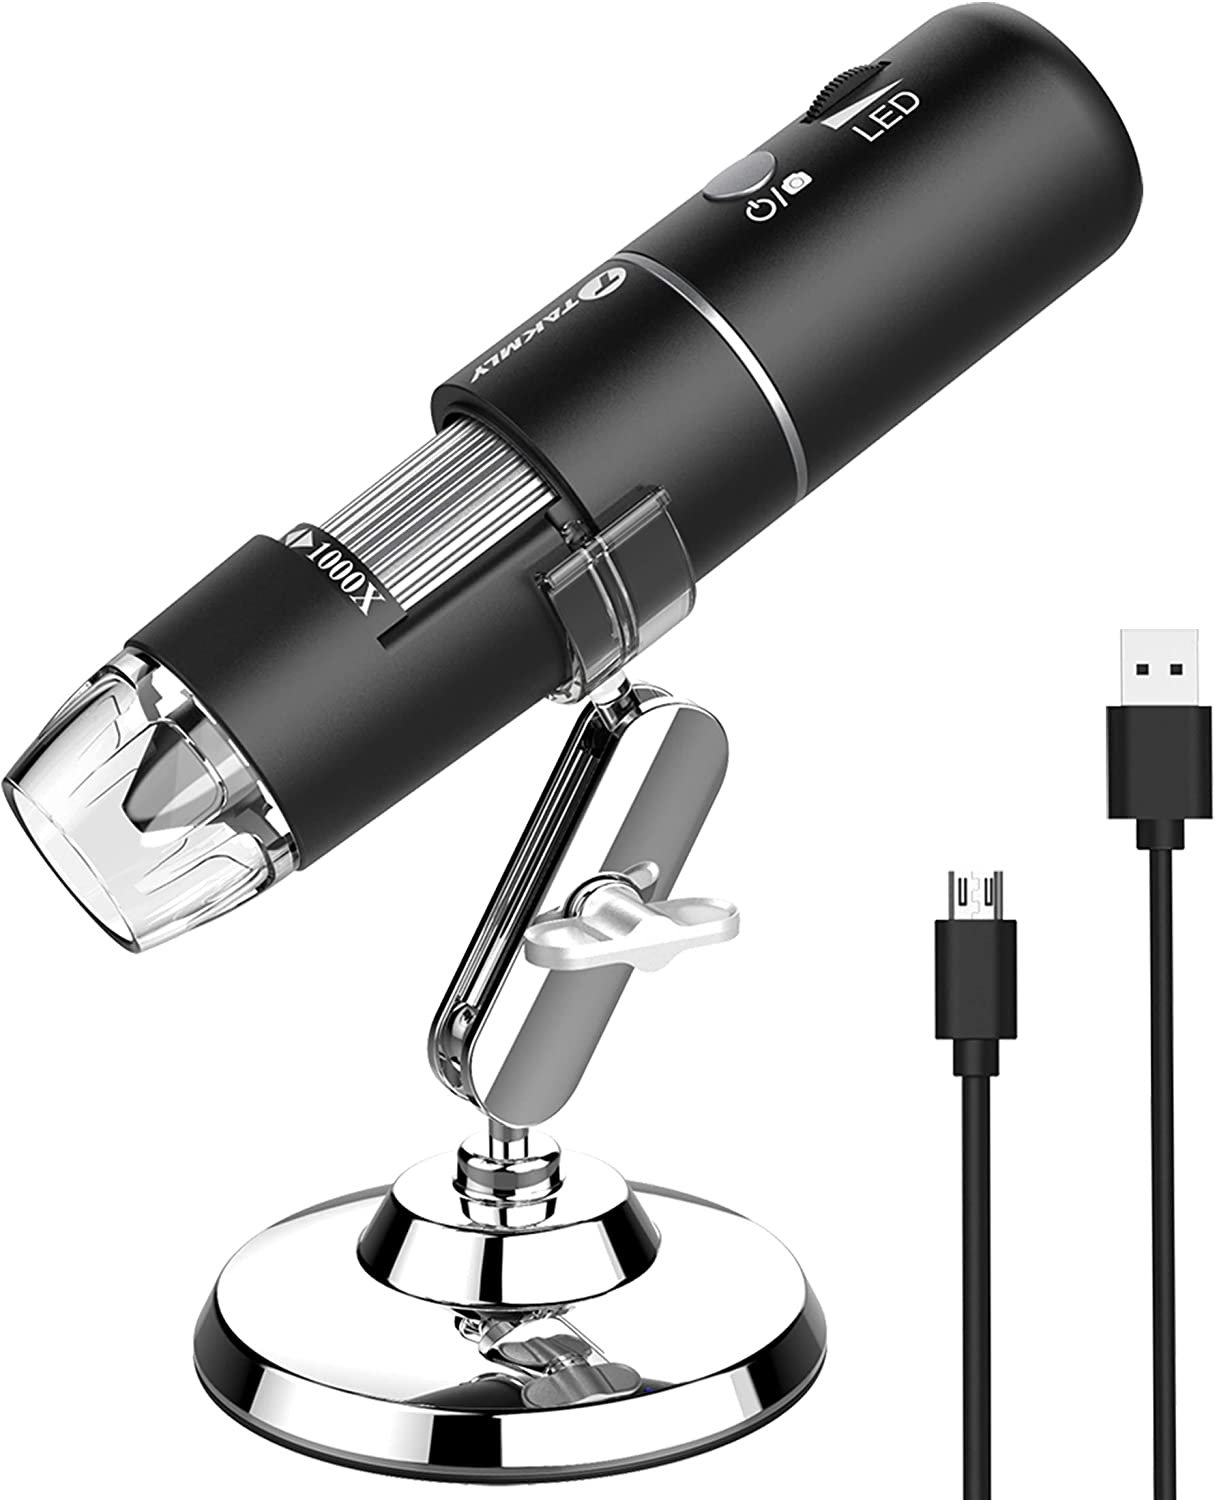 Review of Digital Microscope, HD Inspection Camera 50x-1000x Magnification from T TAKMLY